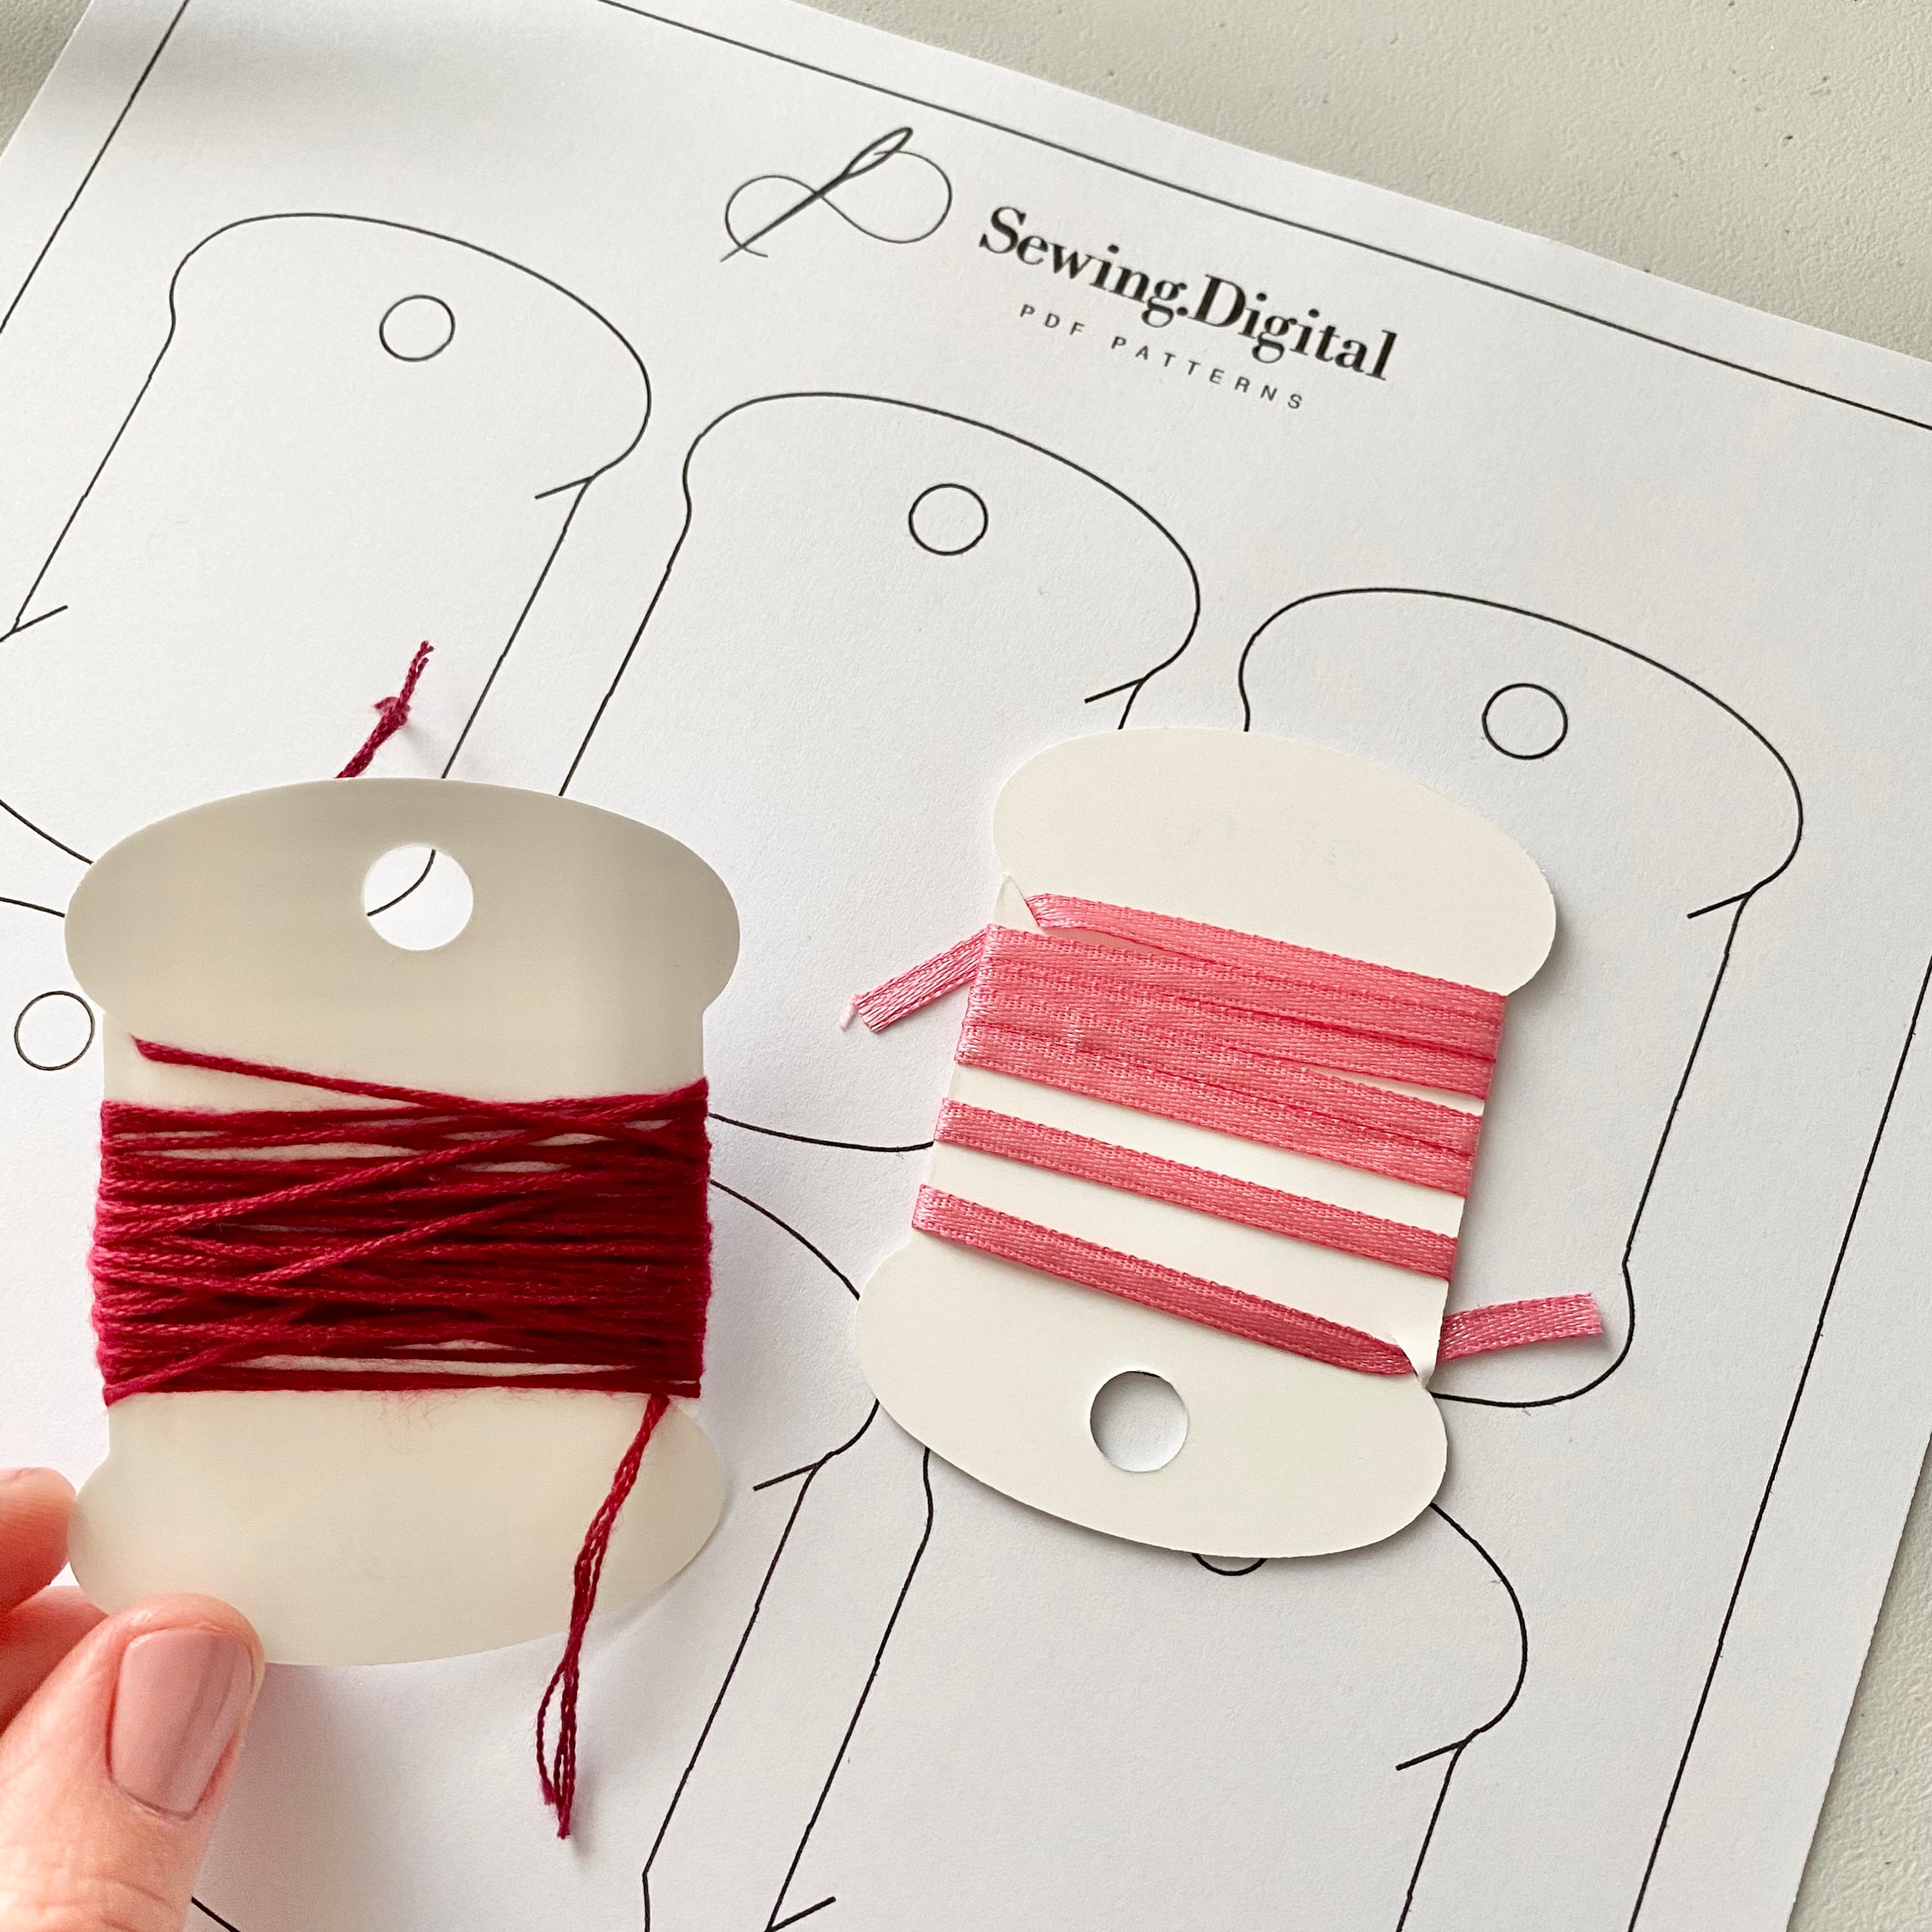 DIY Embroidery Floss Bobbins and How to Organize Your Embroidery Floss –  365 Days of Dana